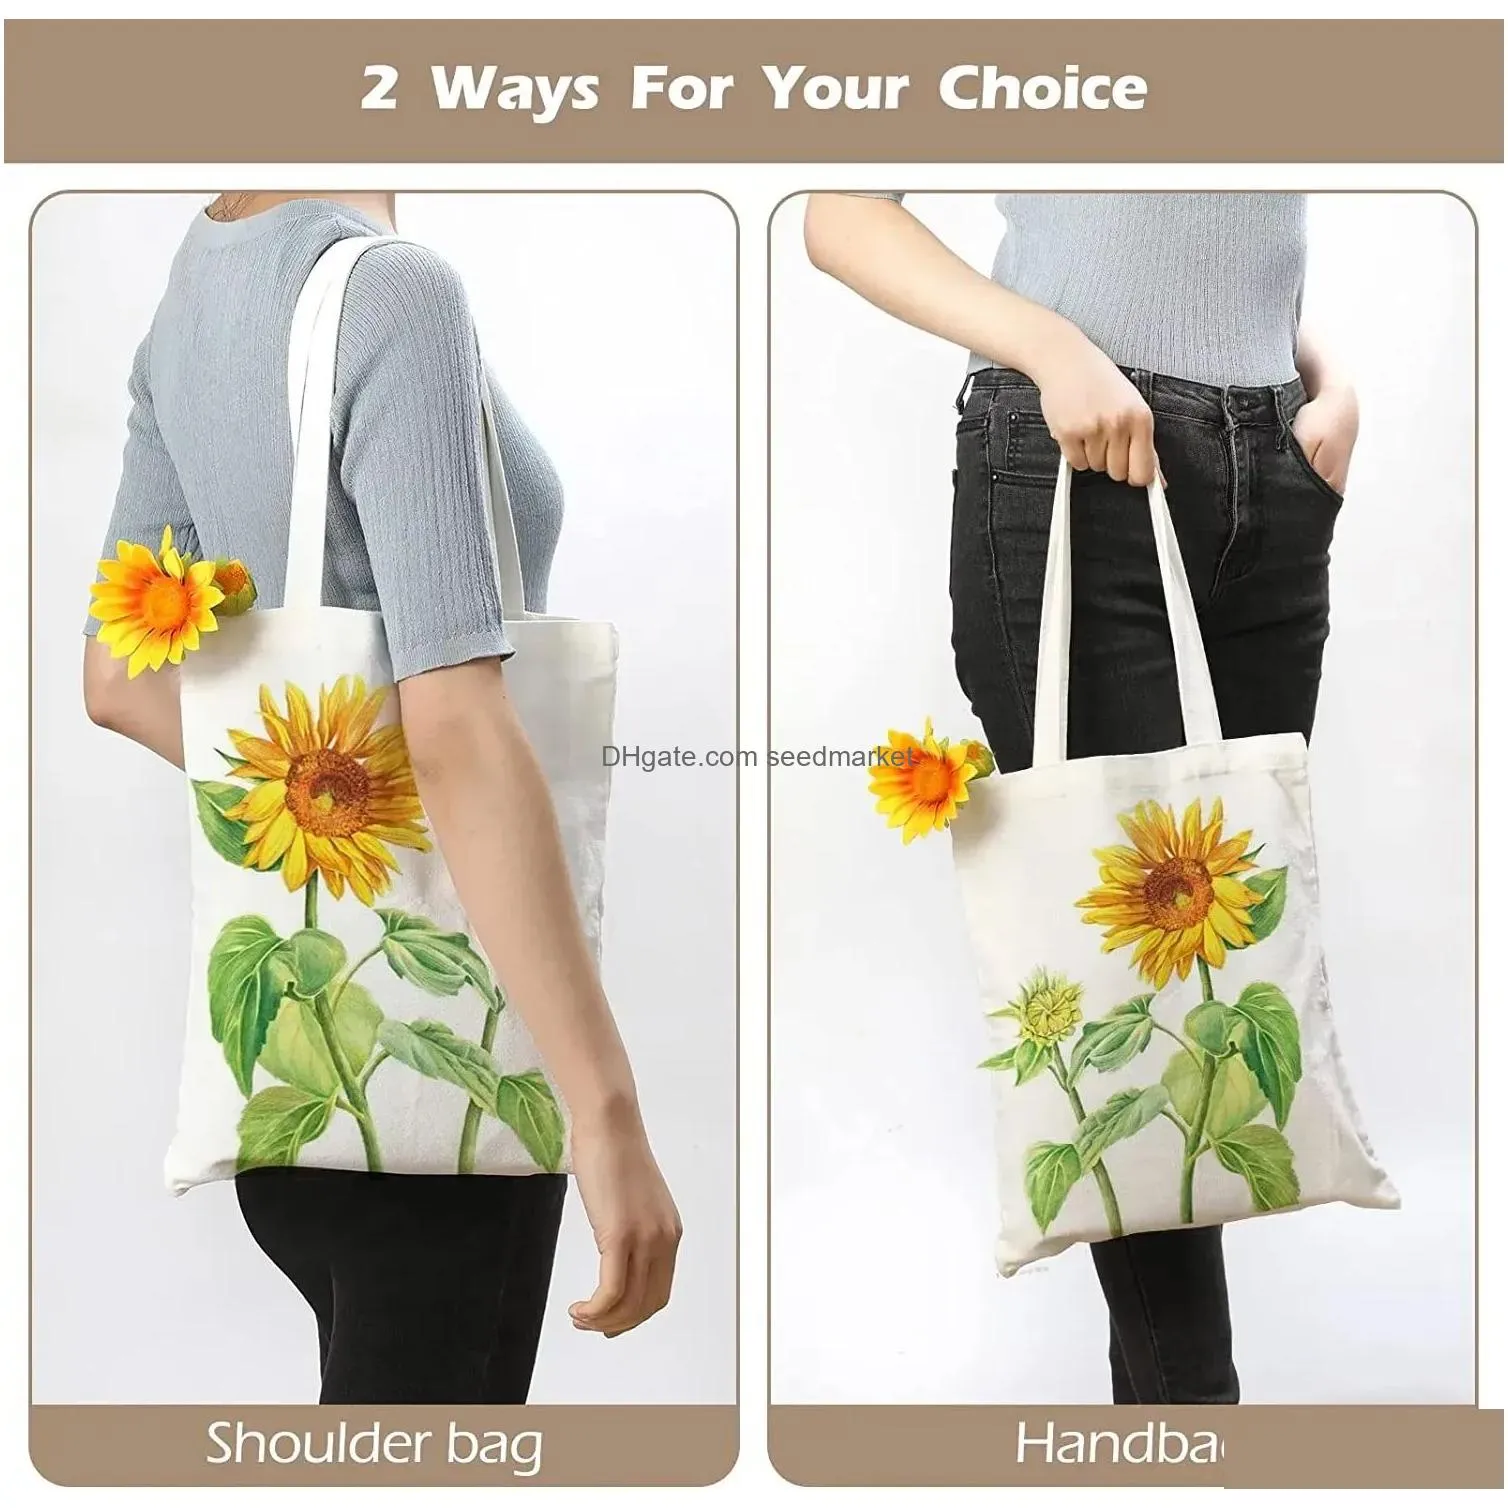 white sublimation tote bags favor blank canvas grocery bags for decorating and diy crafting dhs fy3438 b1101